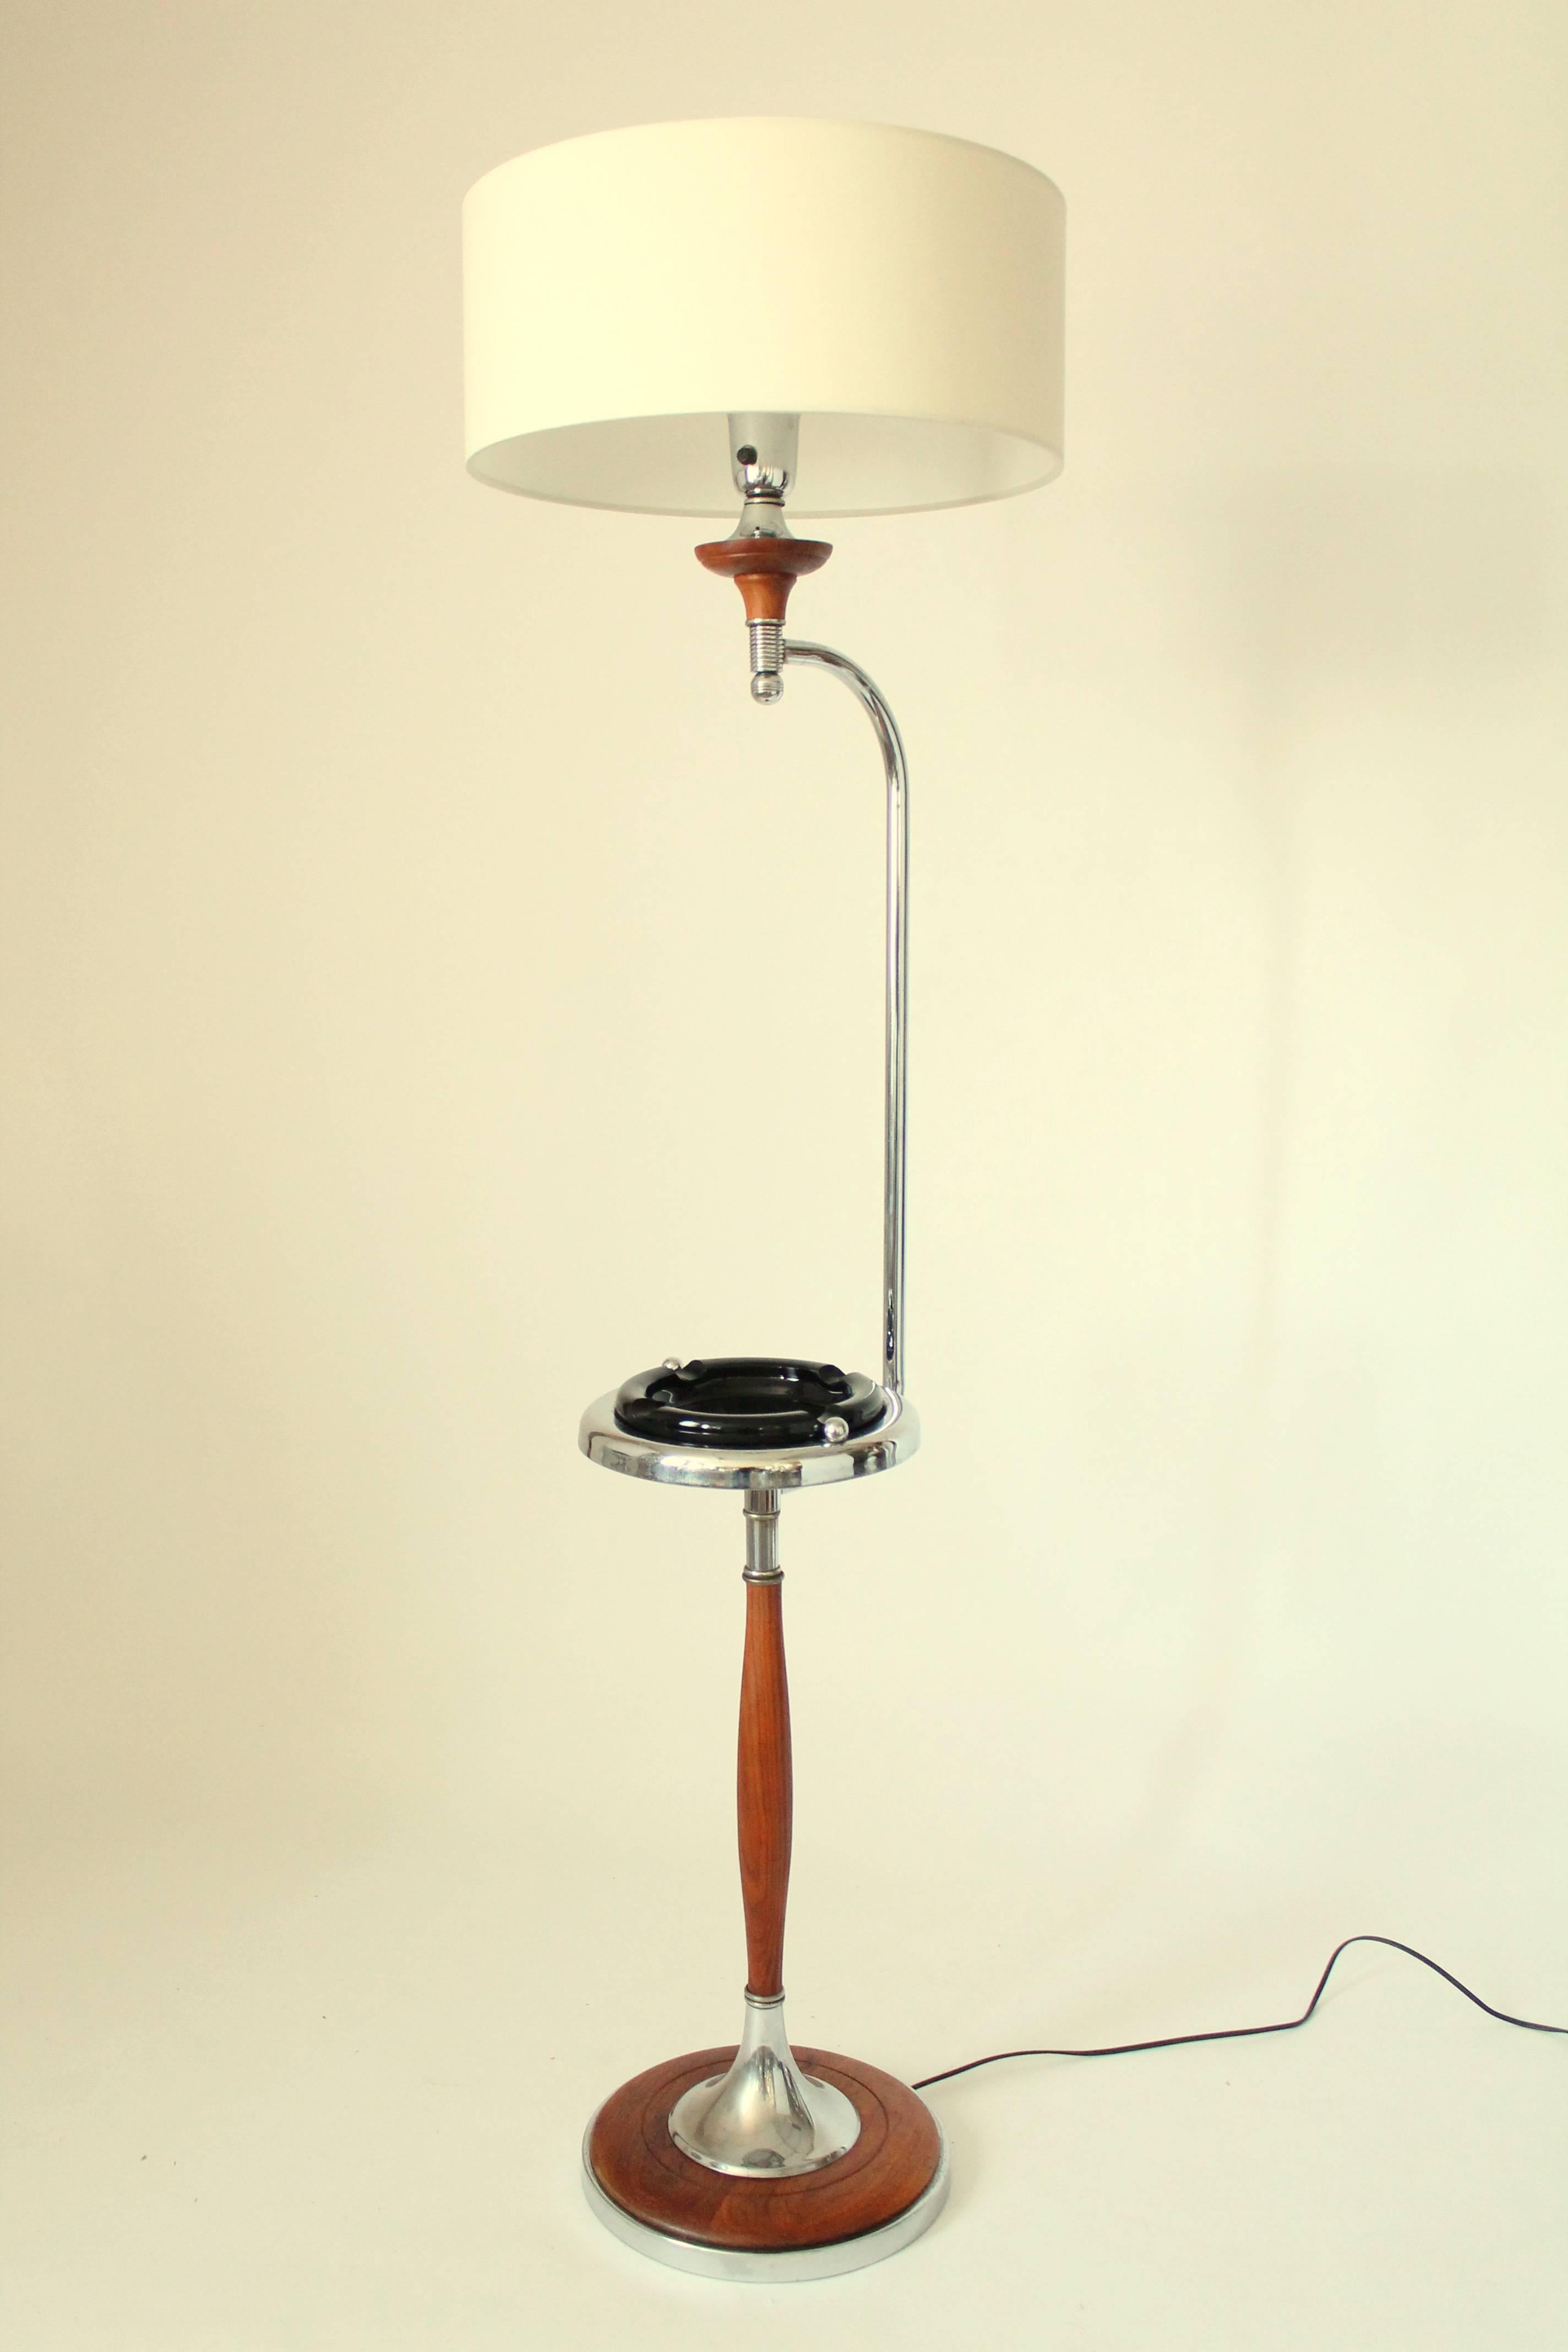 Art Deco Floor Lamp/Ashtray Combo, Walnut and Chrome, 1930s, USA In Good Condition For Sale In St- Leonard, Quebec